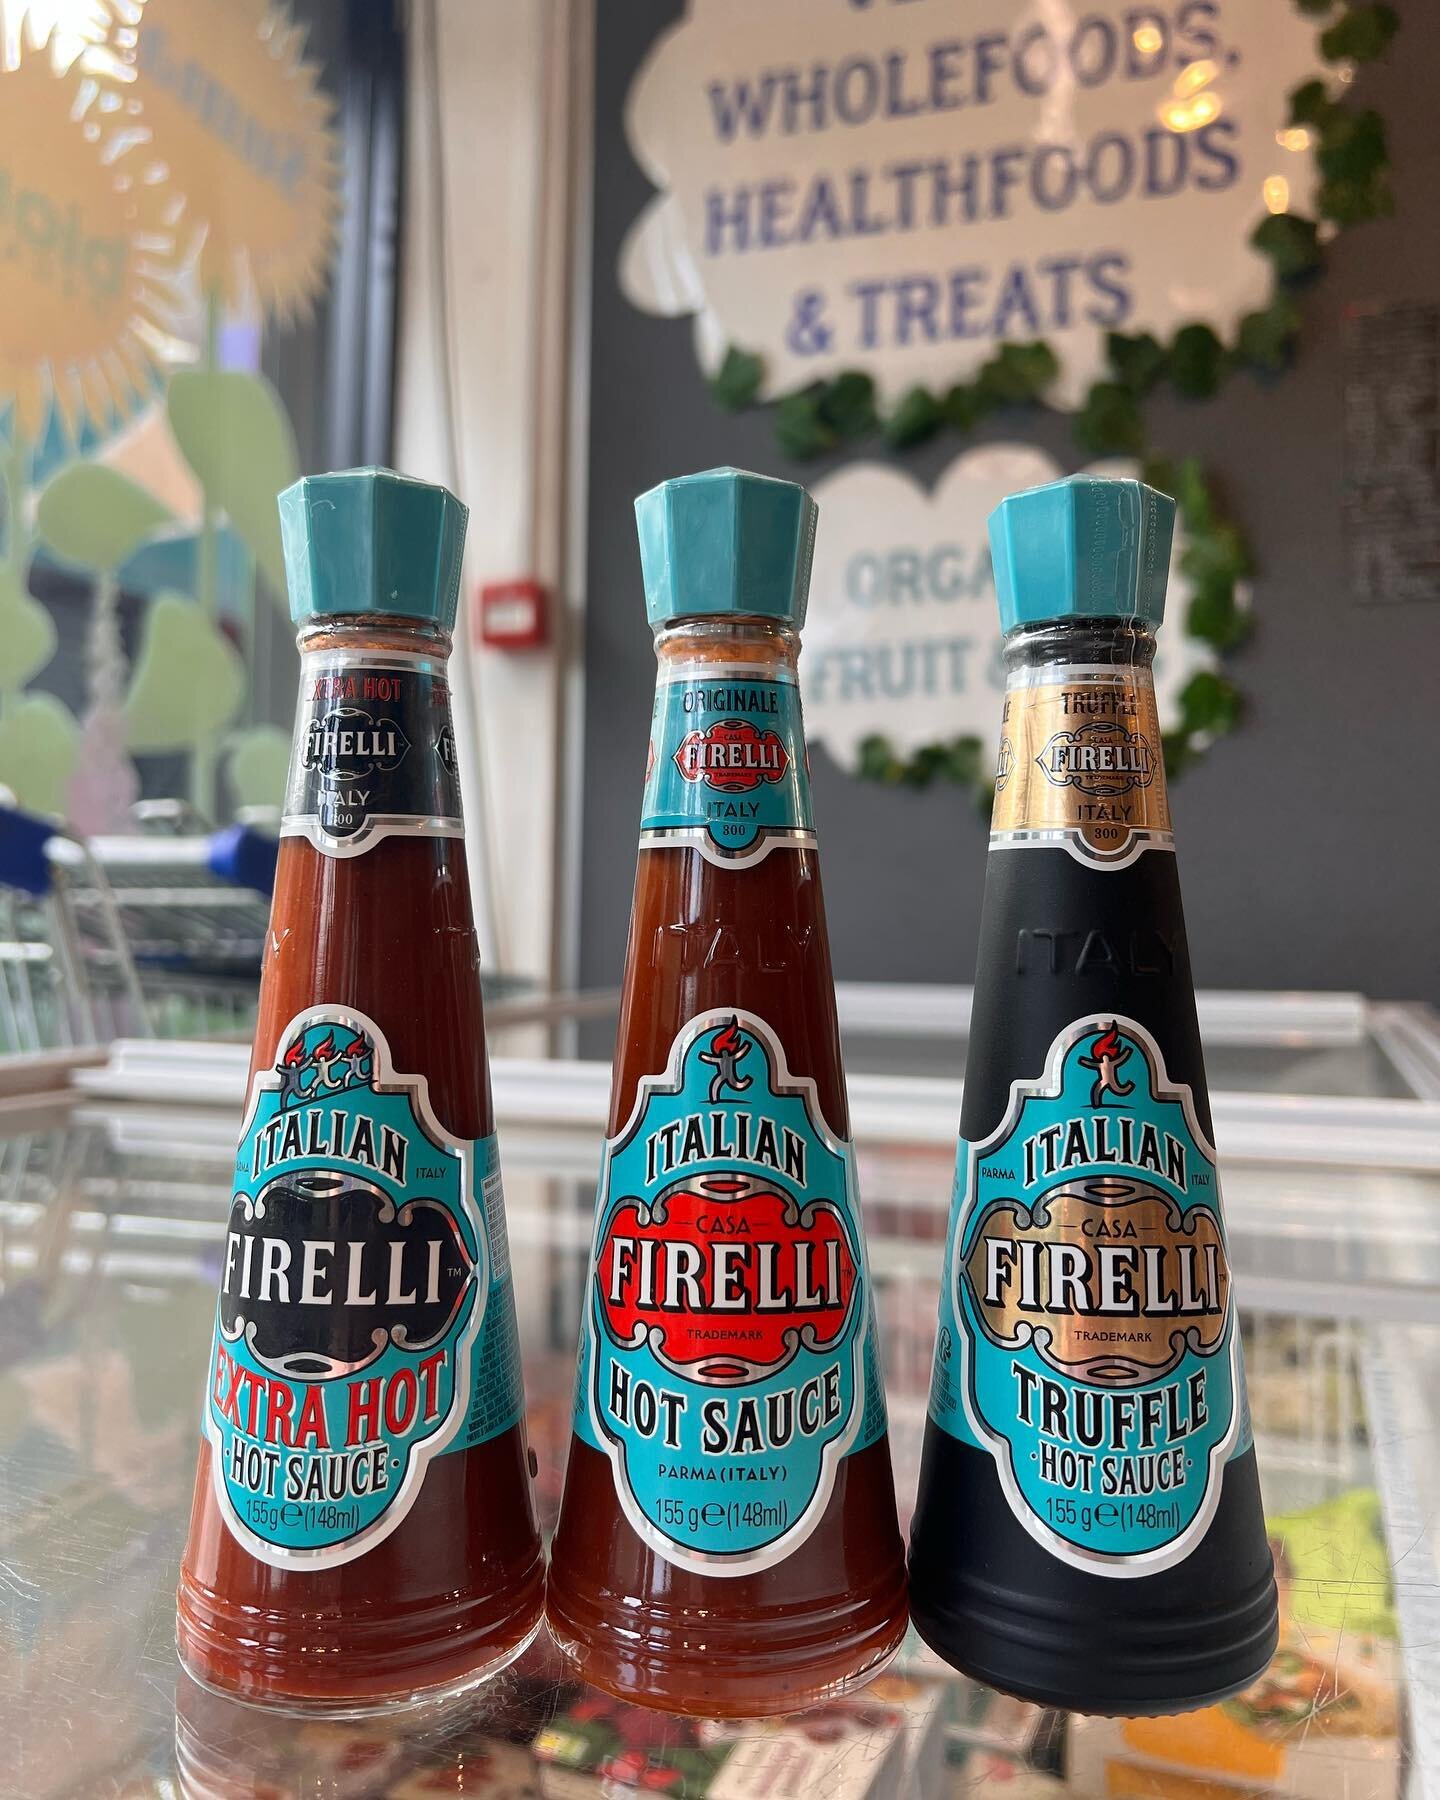 New hot sauces in stock this week, what do we think? Would you give truffle hot sauce a go? 🌶️🌶️🌶️

#vegan #veganliverpool #veganfood #shoplocal